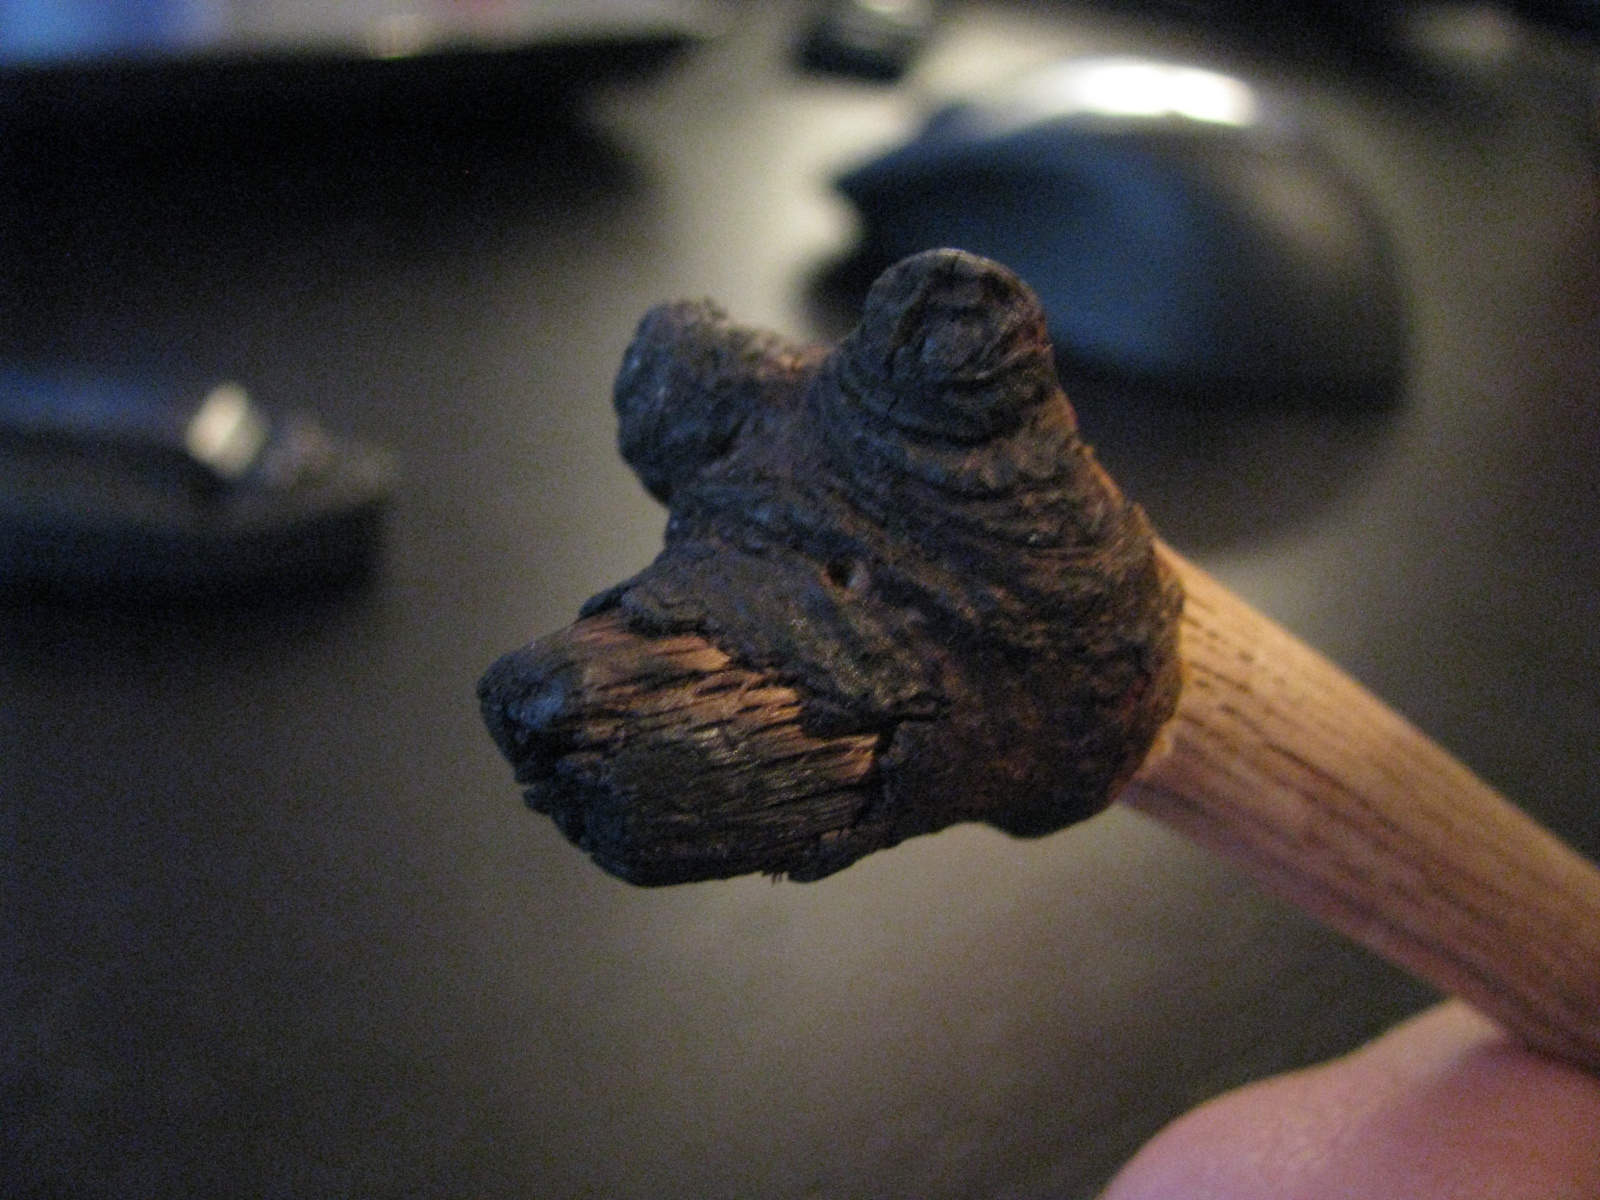 This burnt stick looks exactly like a black bear.